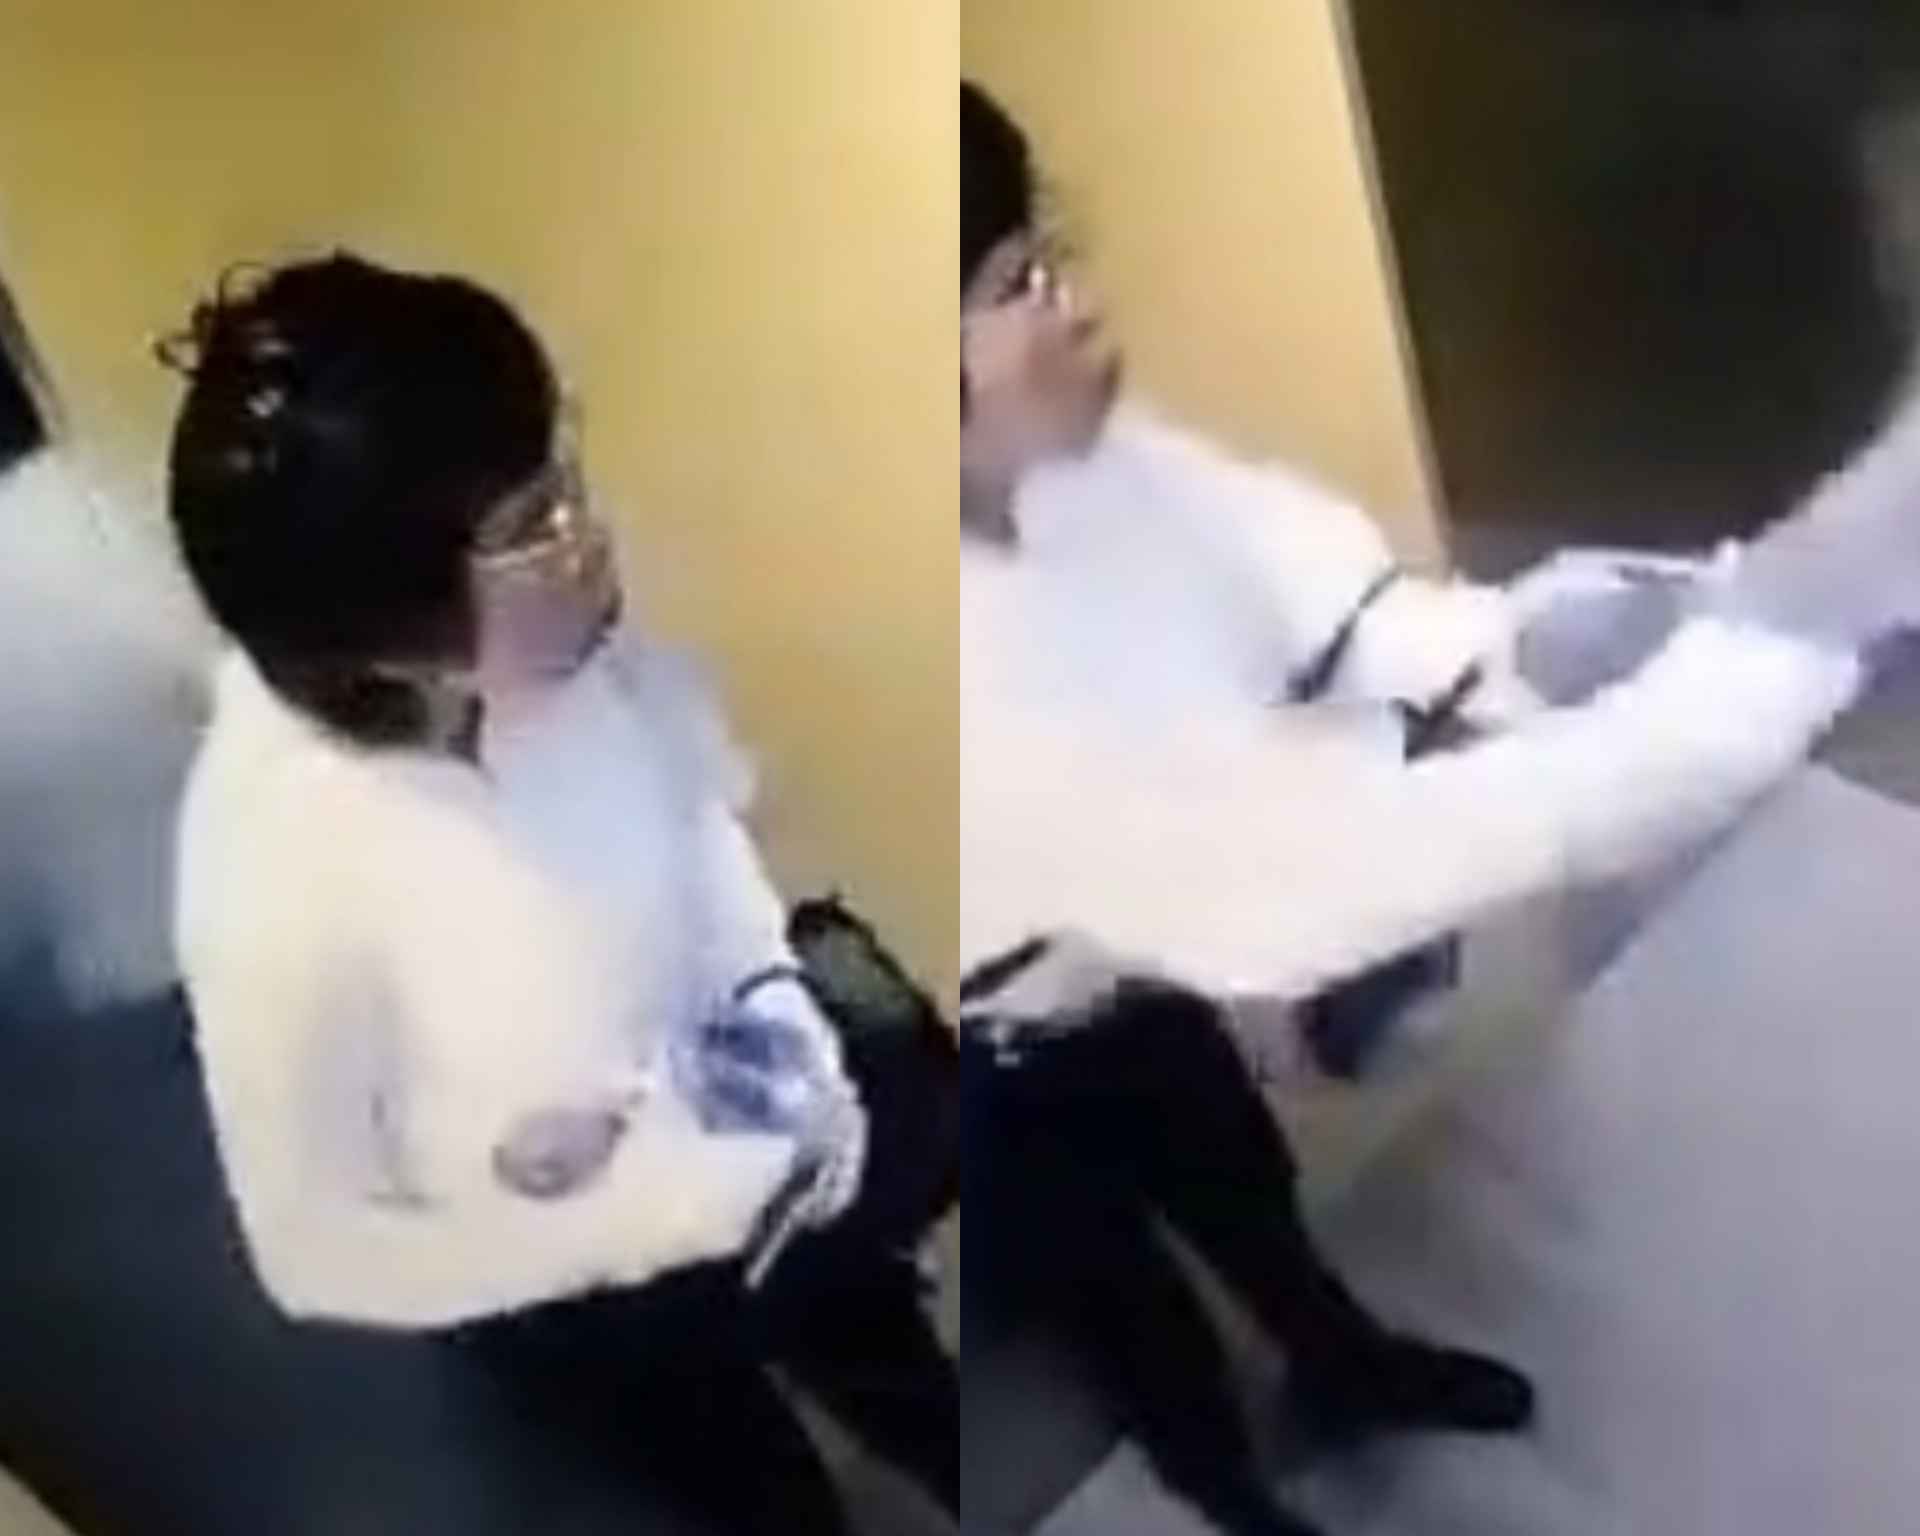 Chinese Woman Pours Hot Water on Disabled Person in Elevator